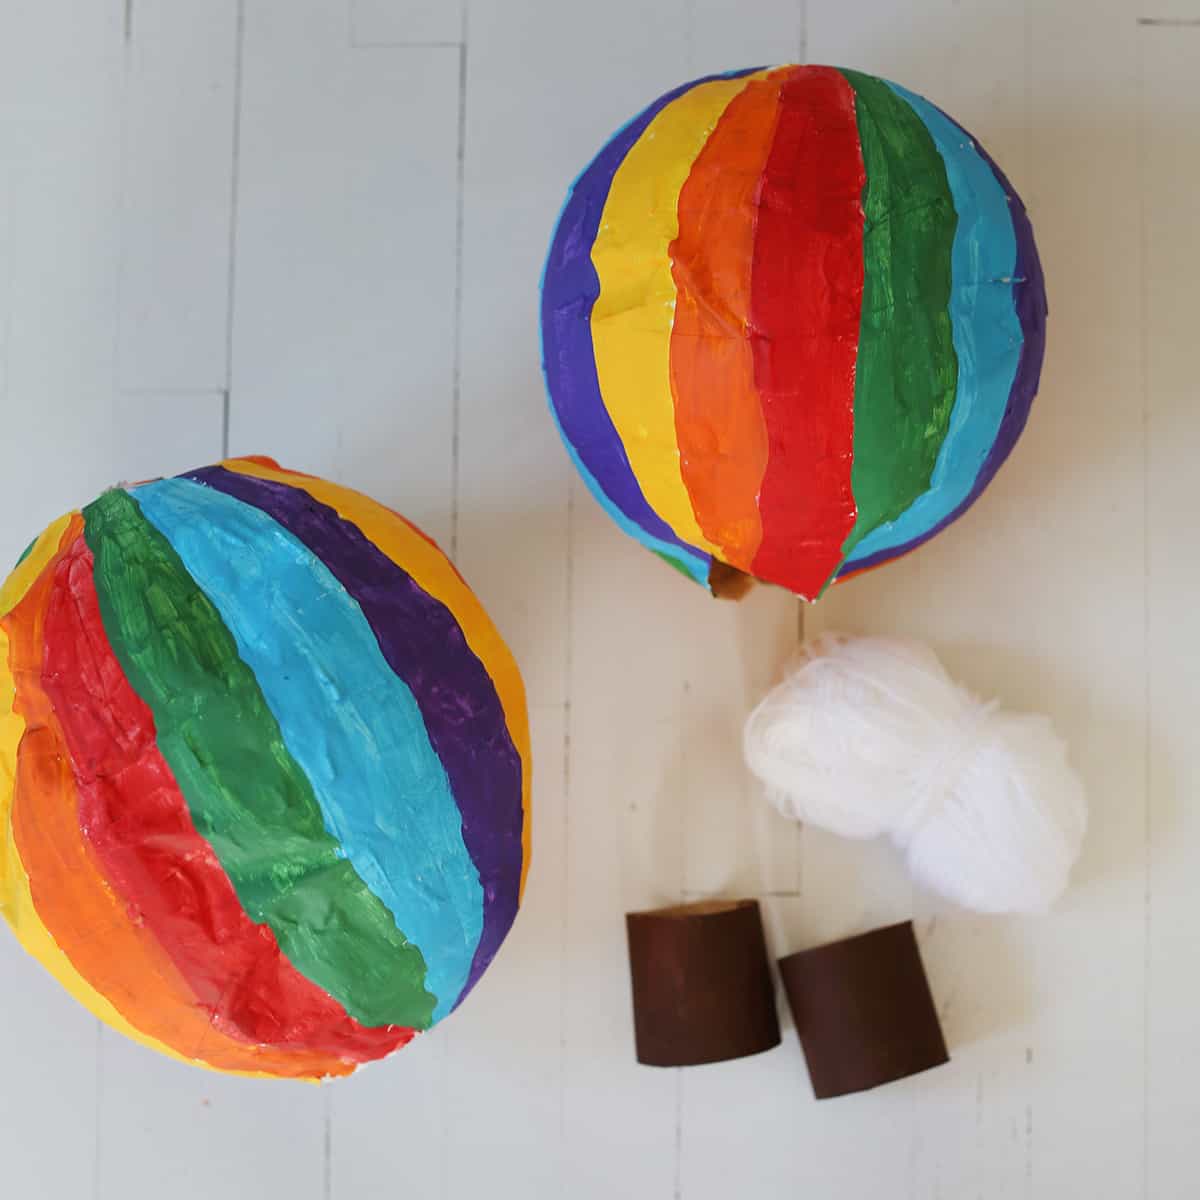 Hot air balloon craft made with paper mache and toilet paper rolls. 